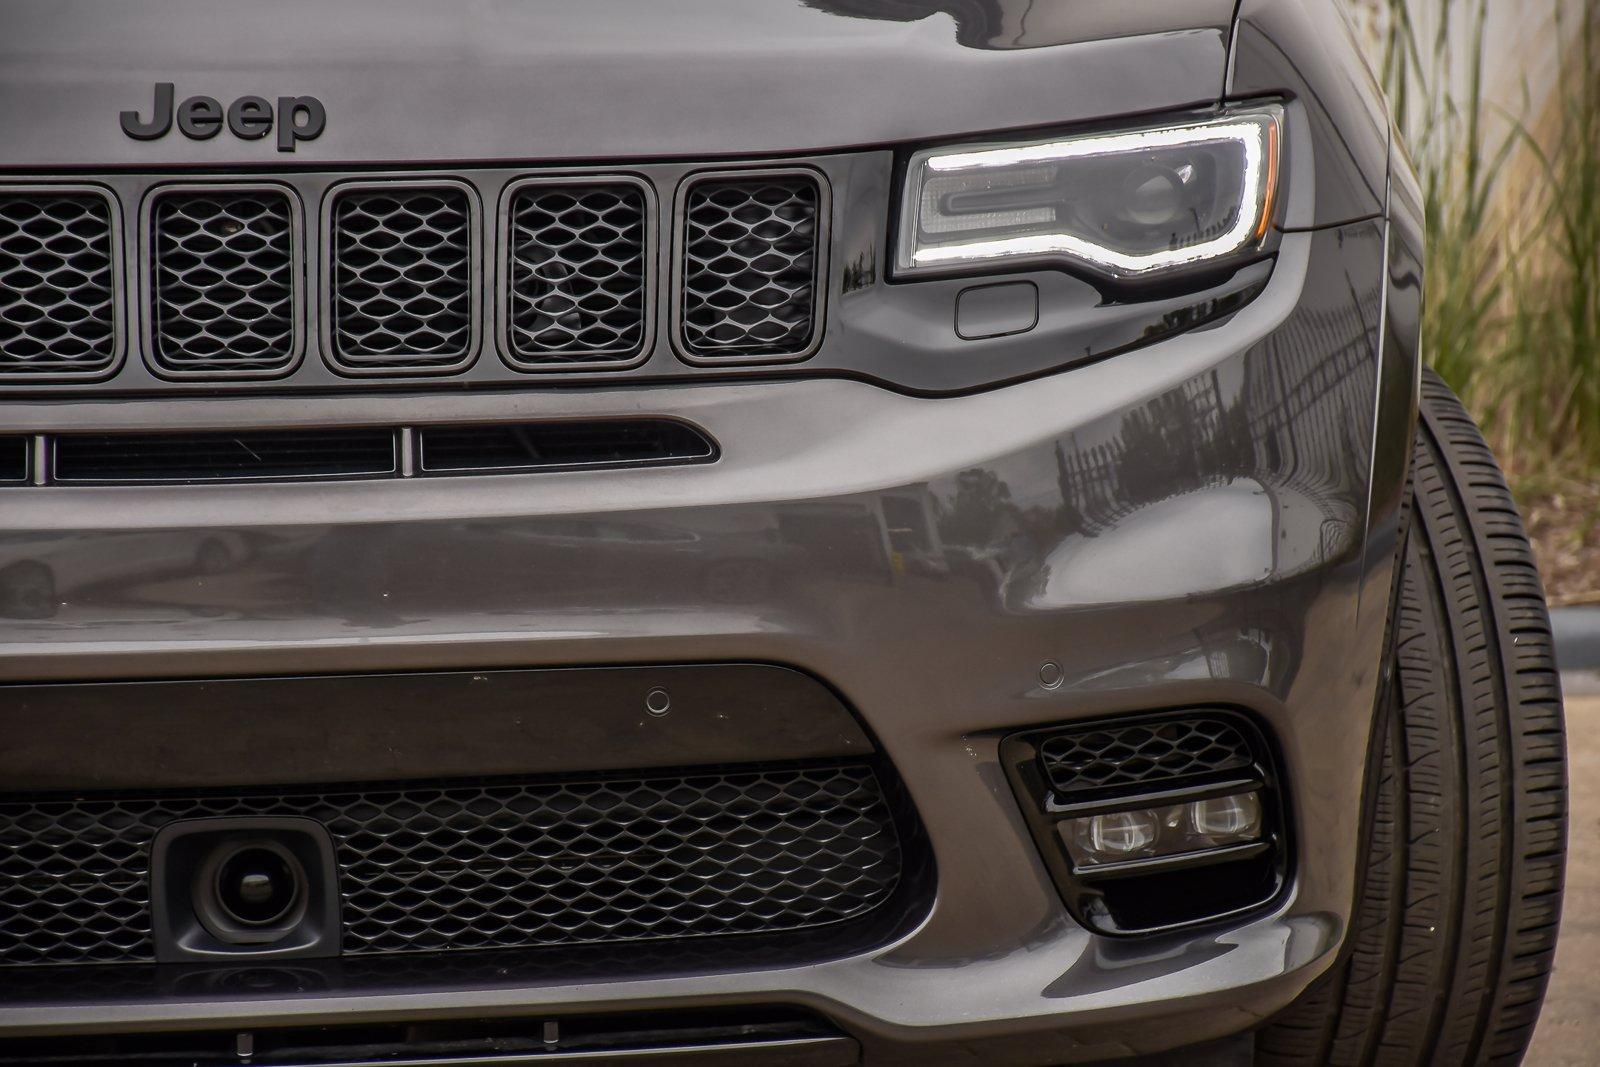 Used 2018 Jeep Grand Cherokee SRT | Downers Grove, IL